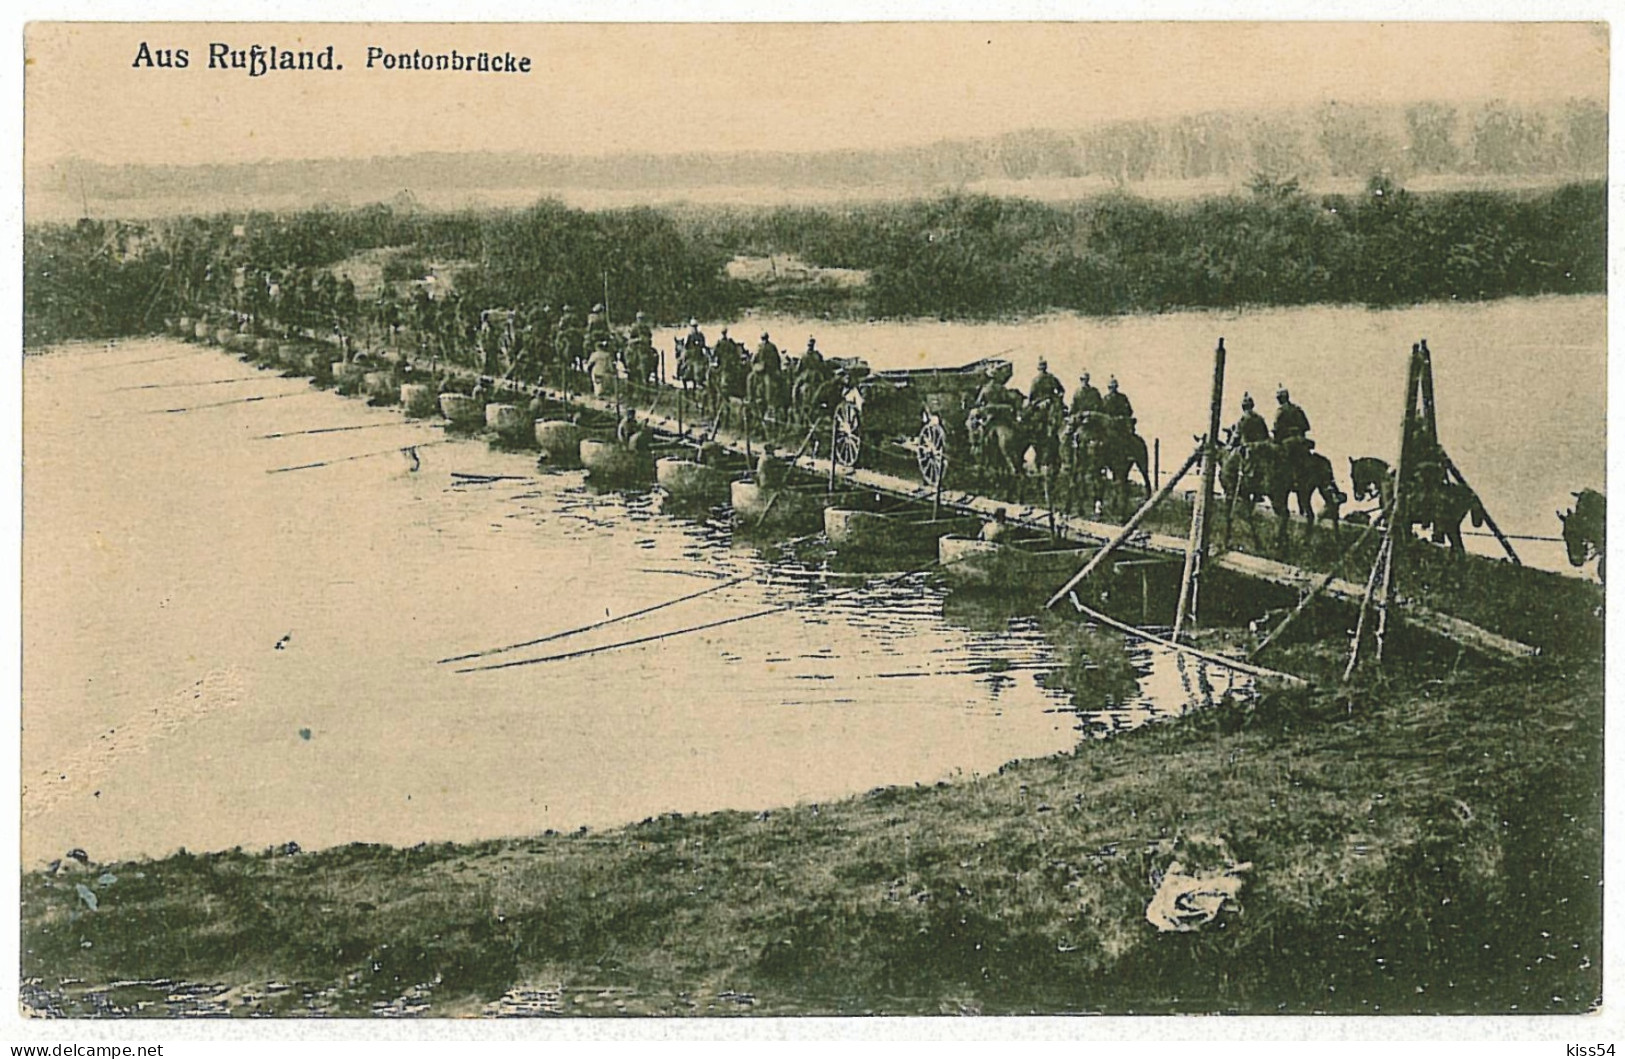 RUS 57 - 5061 Russian Army On The Pontoon, Russia - Old Postcard - Used - 1916 - Russland